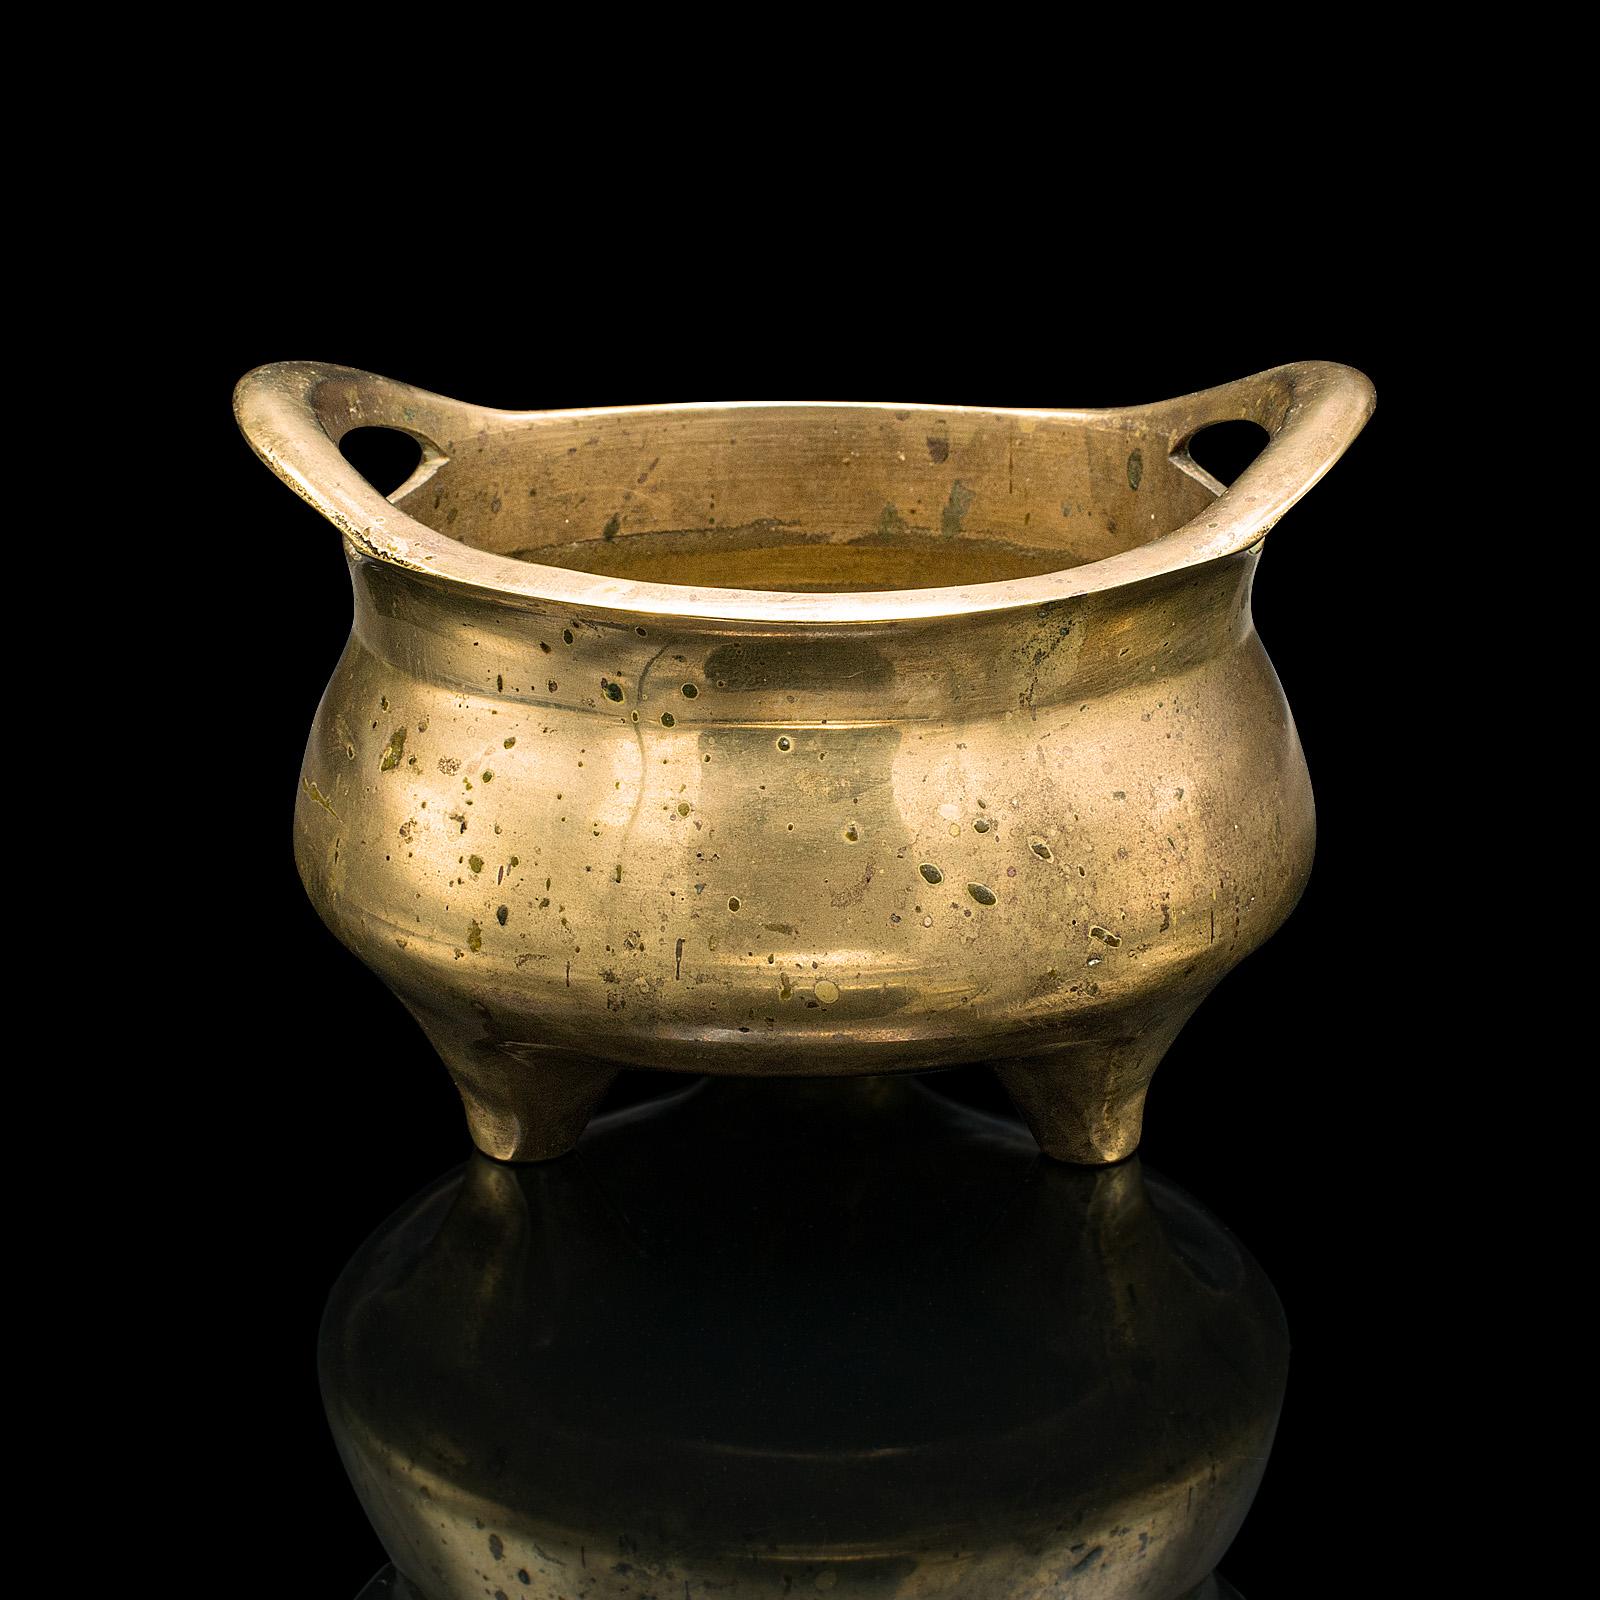 This is an antique incense burner. An Oriental, brass censer, dating to the late Victorian period, circa 1900.

Appealing golden tones and of tactile form
Displays a desirable, lightly time-worn appearance
Quality brass presents bright tonality